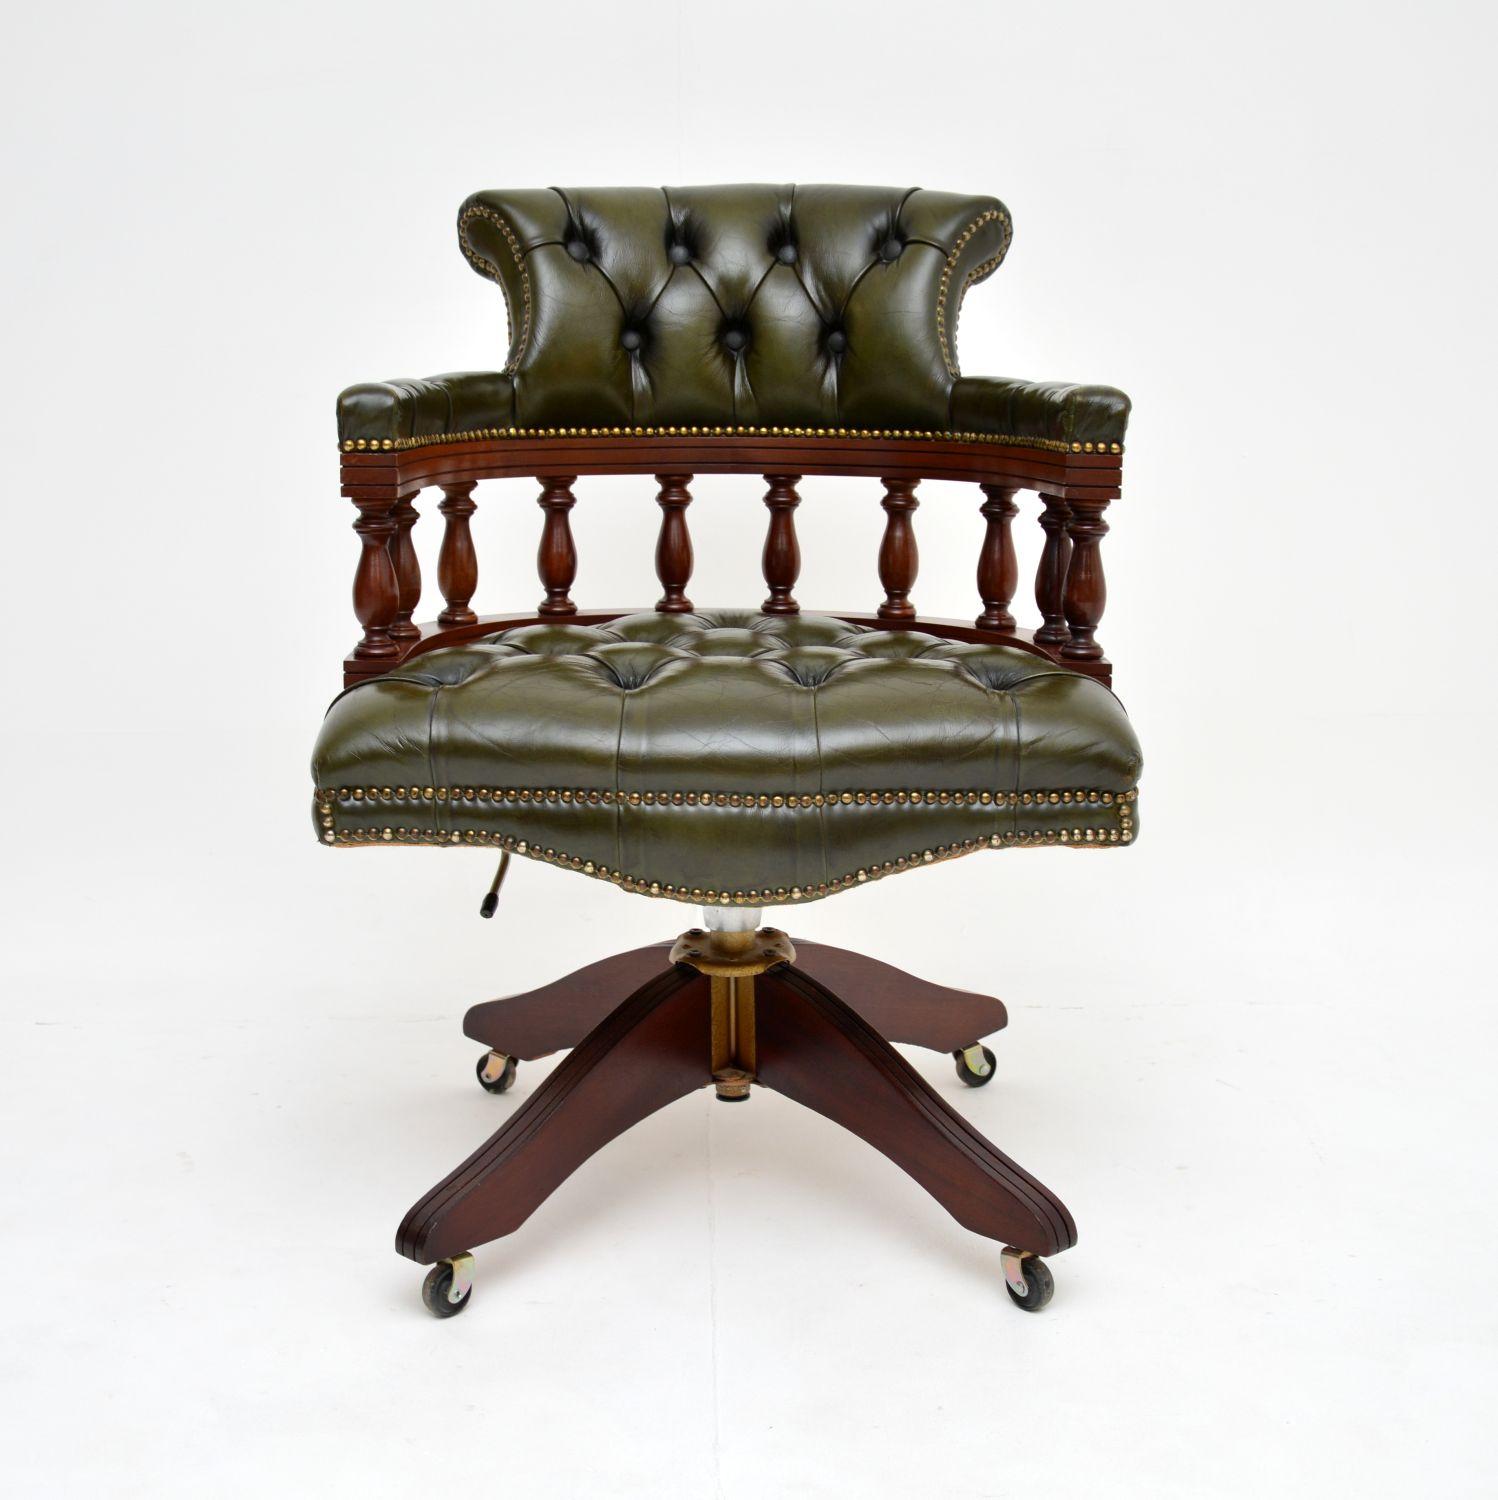 A lovely antique Victorian style leather captains desk chair. This was made in England, it dates from around the 1950’s.

It is very well made and comfortable, with beautiful green deep buttoned leather upholstery. It swivels smoothly on the splayed